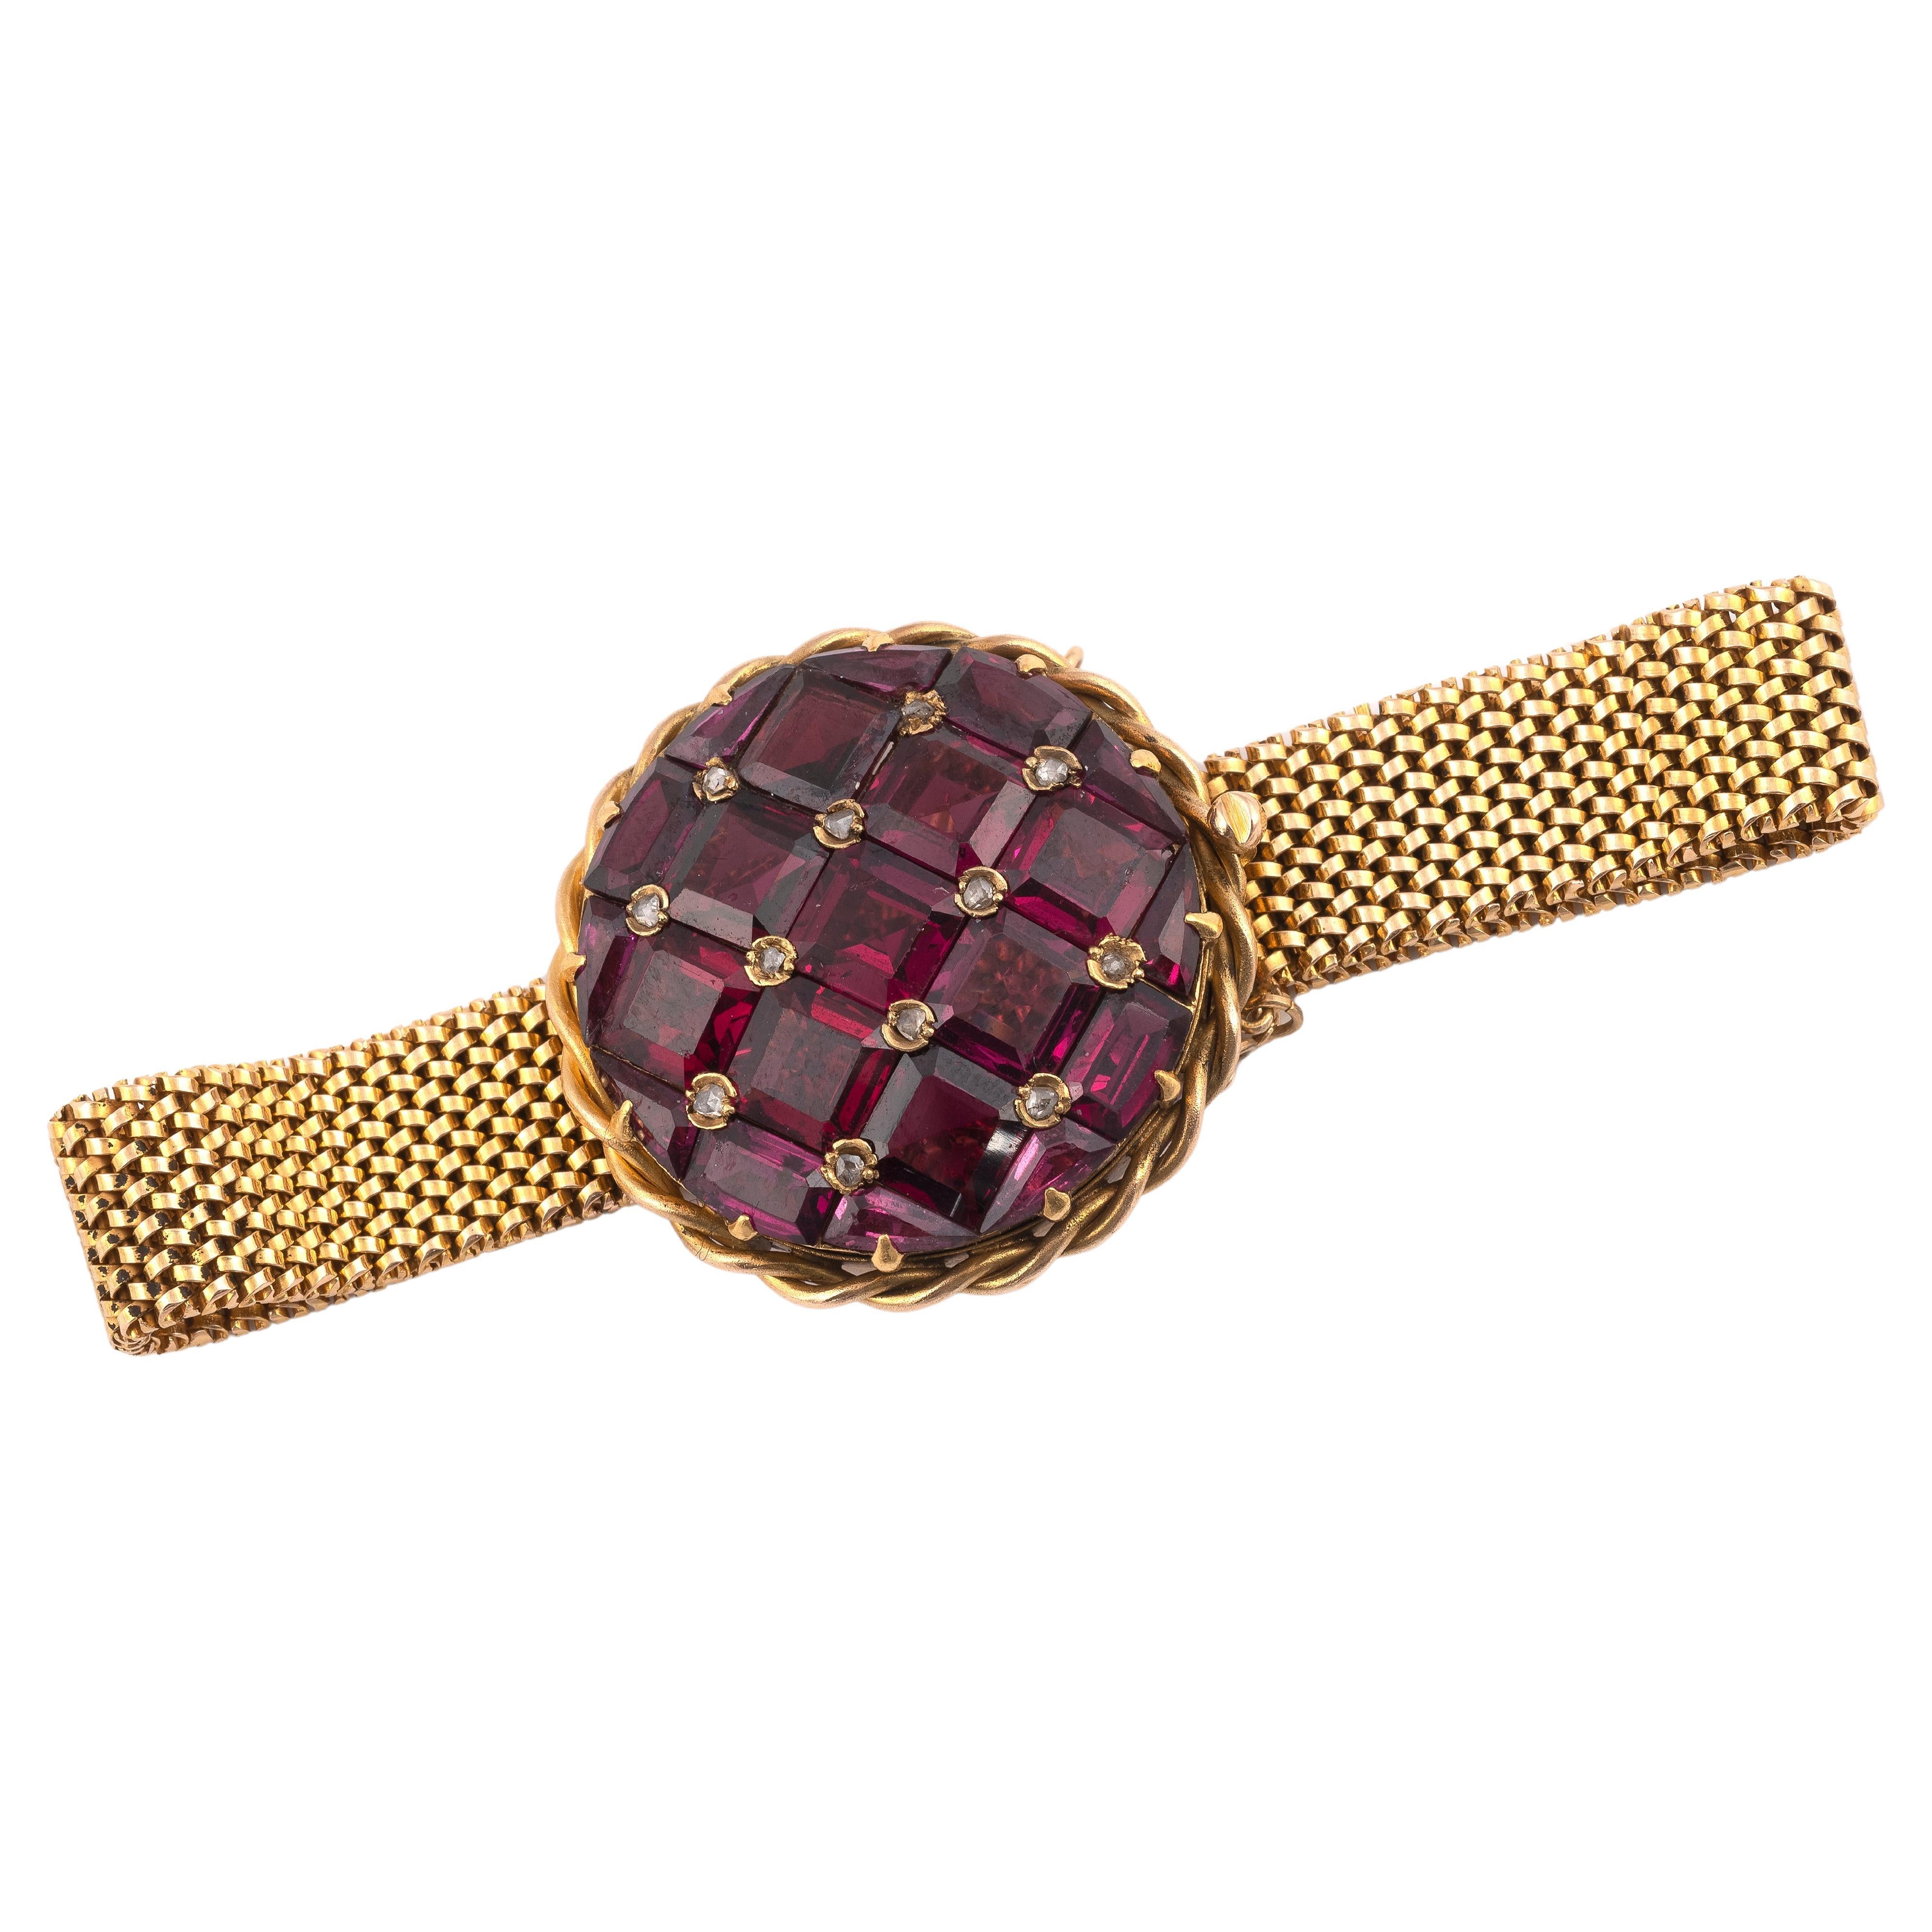 The bracelet centred with a square cut  amethyst and old-cut diamond, in original fitted case.
The central is diameter 30mm
Lenght: 18cm
Weight: 35.42gr.